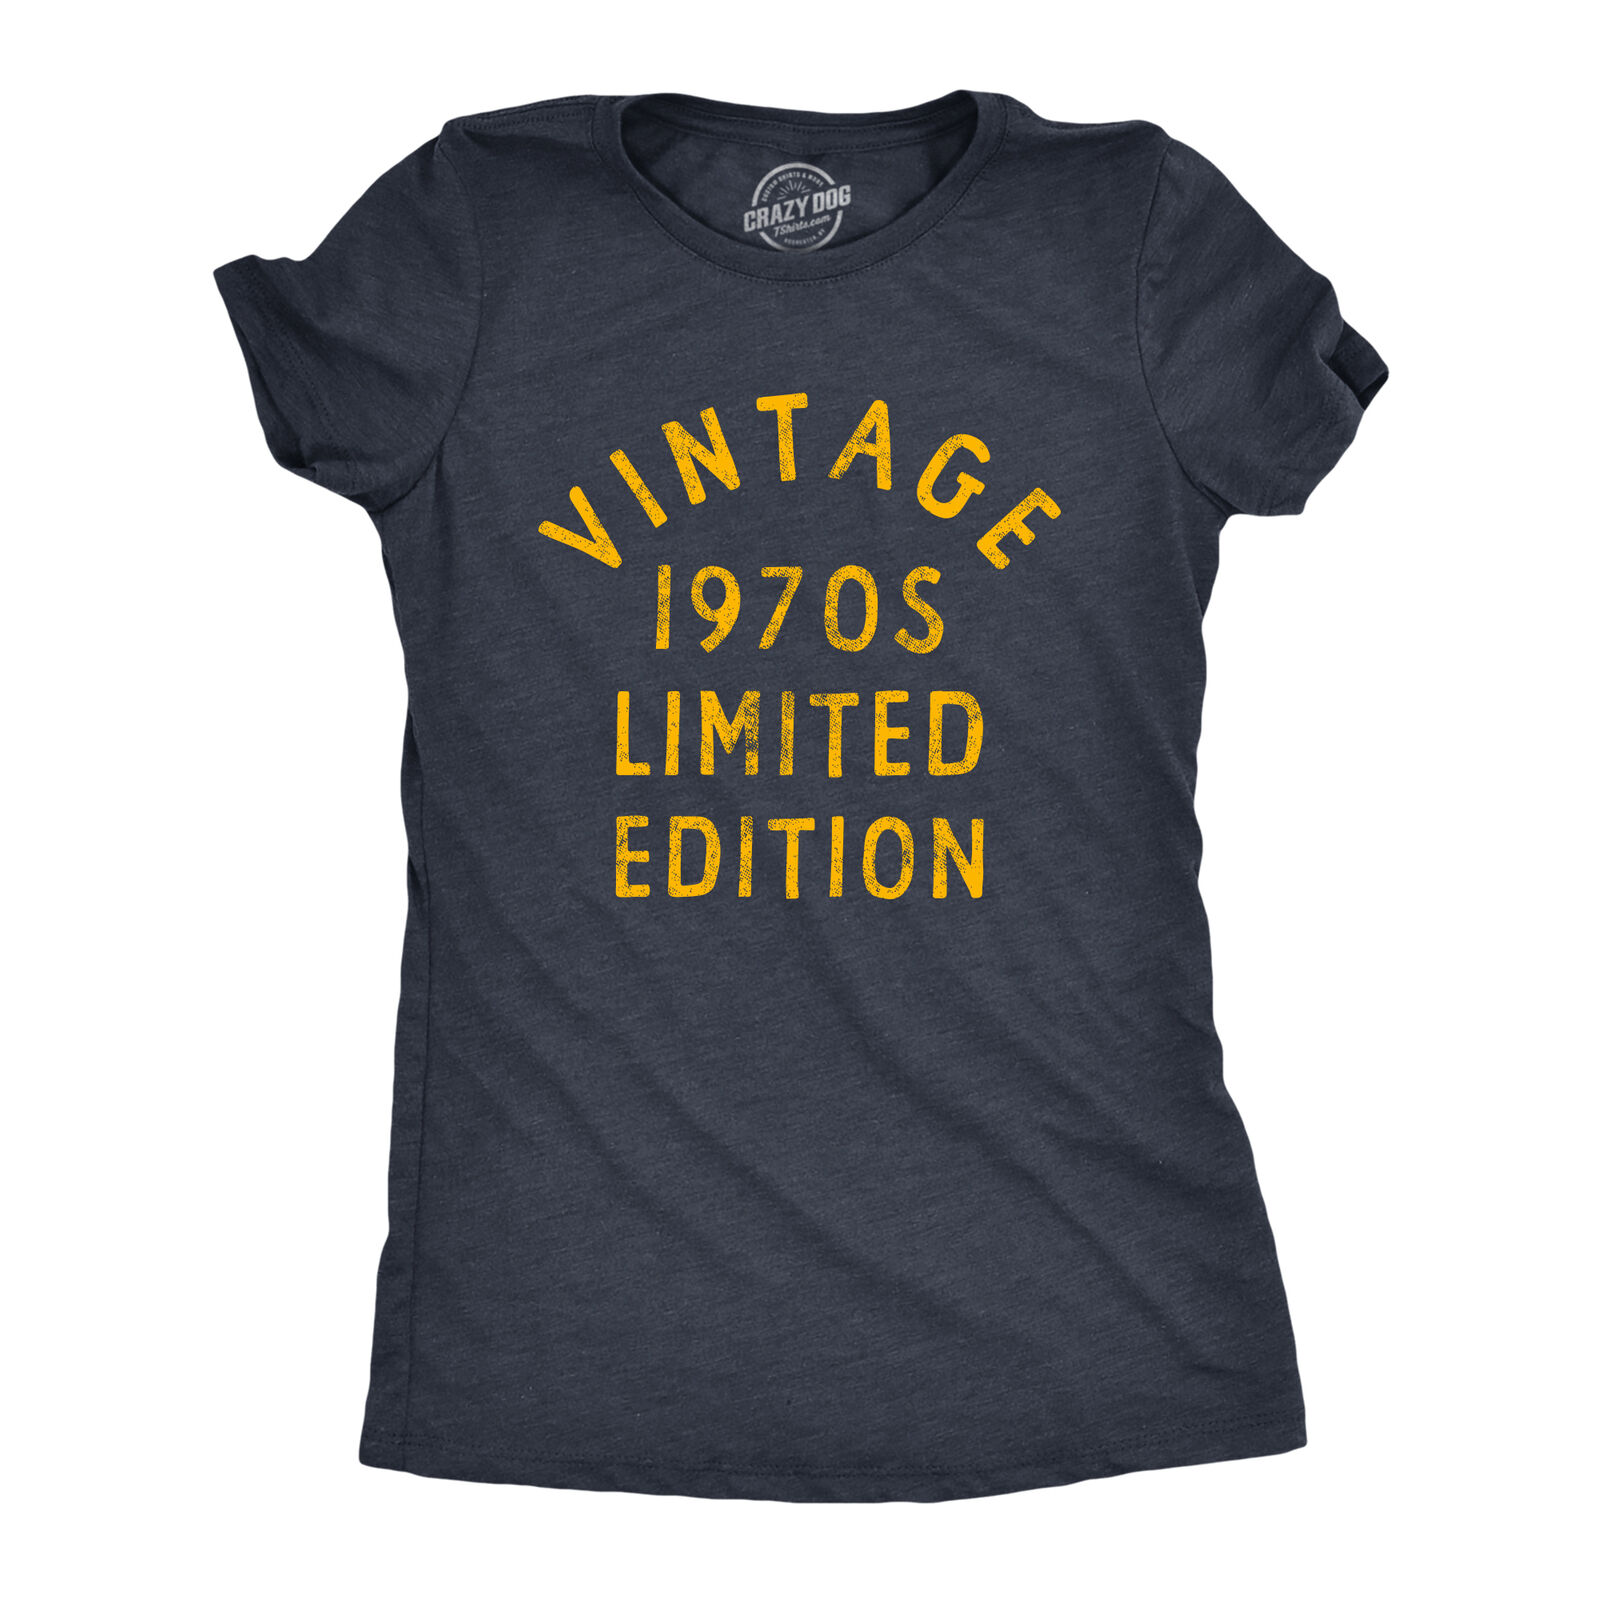 Womens Vintage 1970s Limited Edition T Shirt Funny Cool 1970 Theme Classic Tee